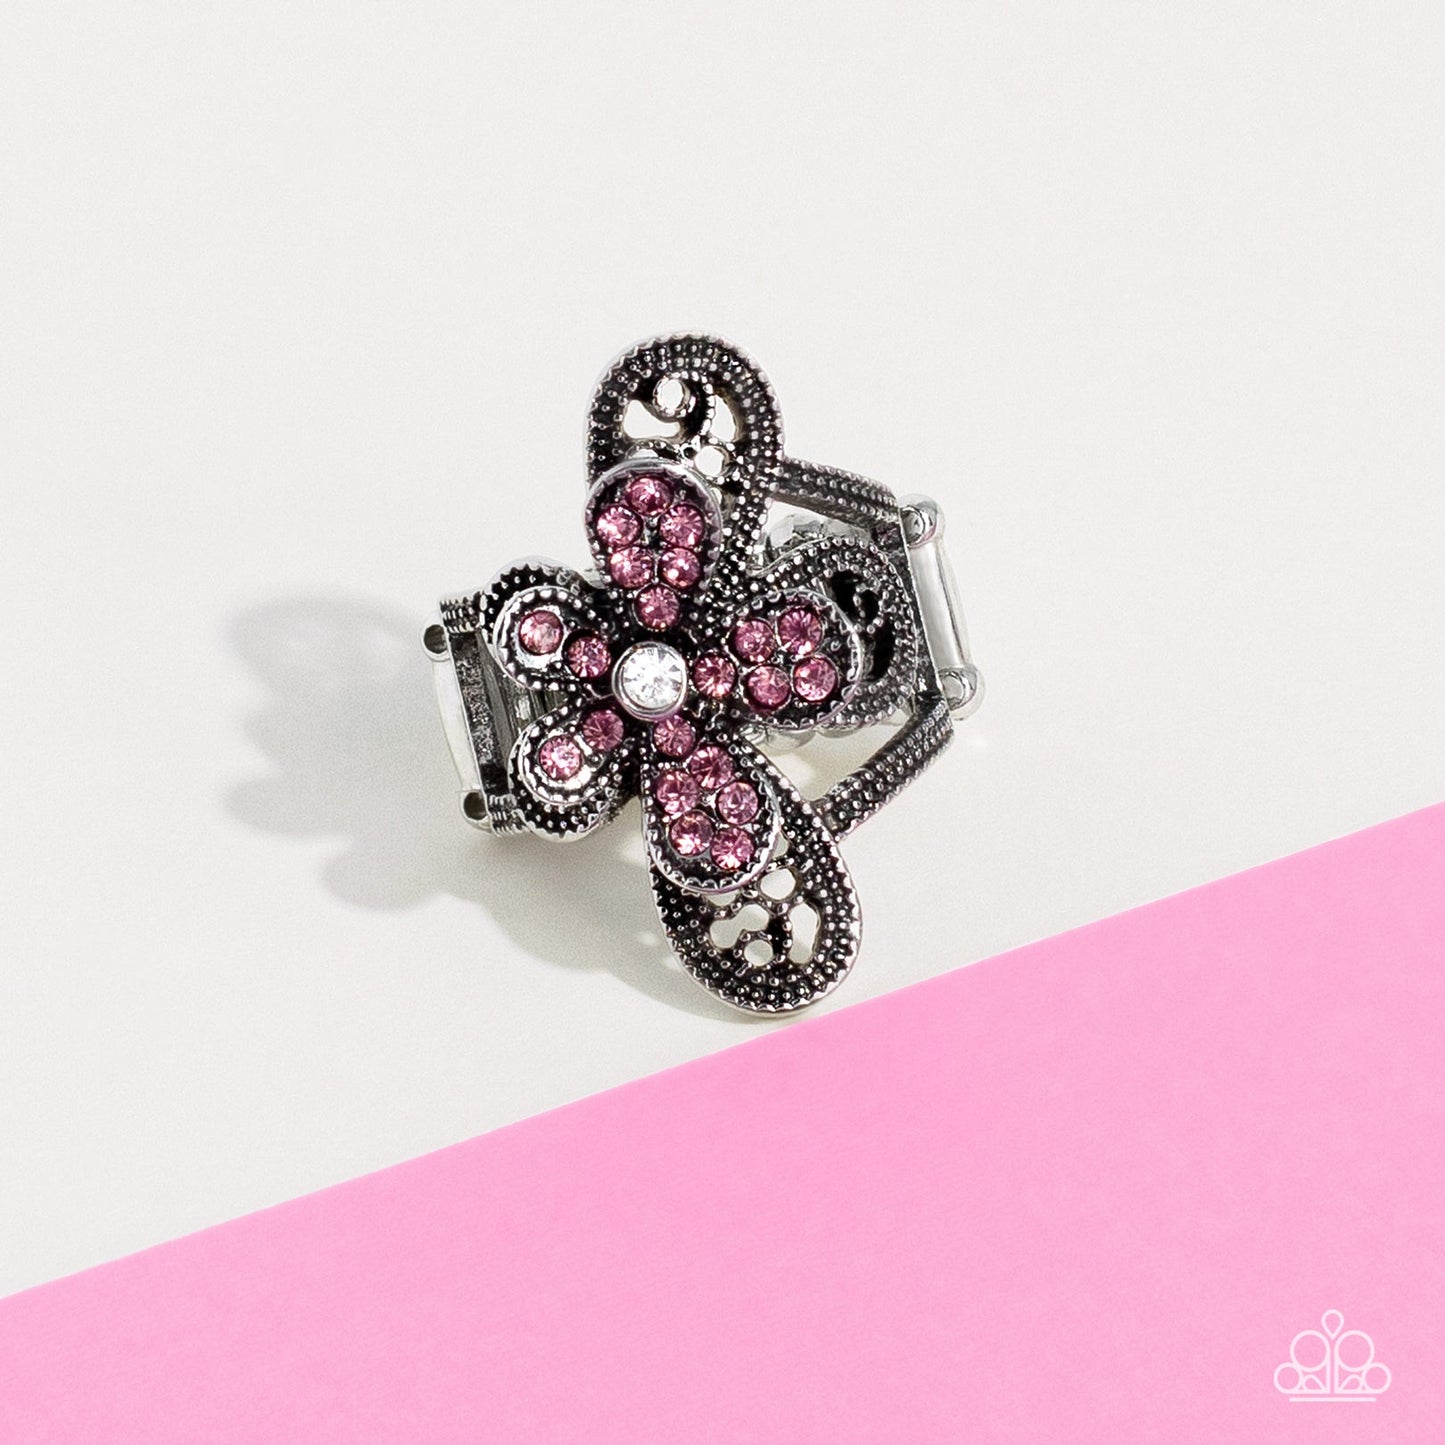 Garden Escapade - Pink and Silver Ring - Paparazzi Accessories - Dotted with a dainty white rhinestone center, silver petals overlaid with glittery pink rhinestones, sit atop studded silver filigree petals, creating a frilly floral centerpiece atop the finger.